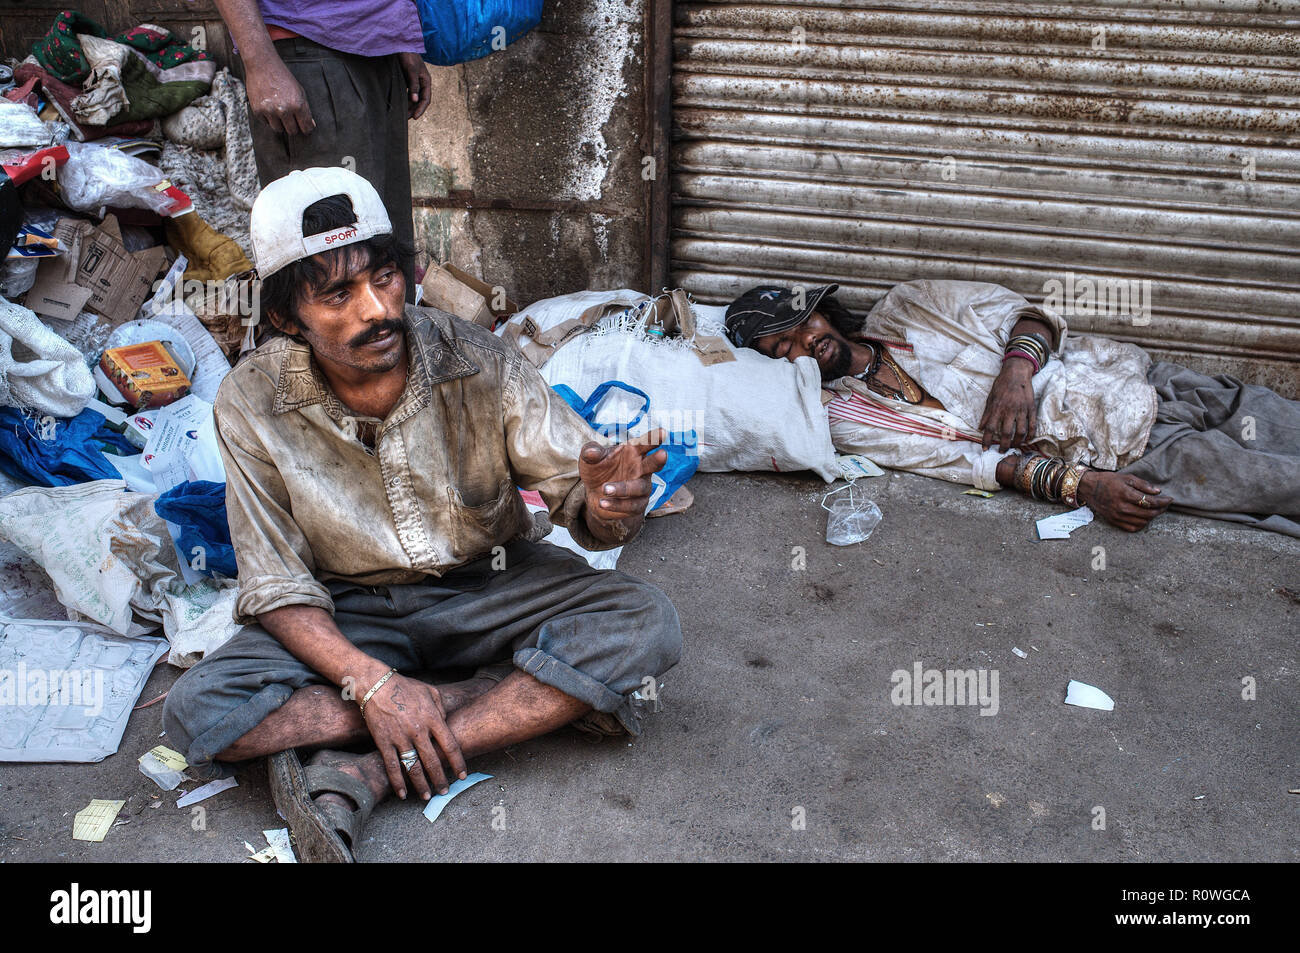 Drug addicts in a filth-strewn lane in notorious Dongri area of Mumbai, India, mostly using a cheap heroin version called 'brown sugar' Stock Photo